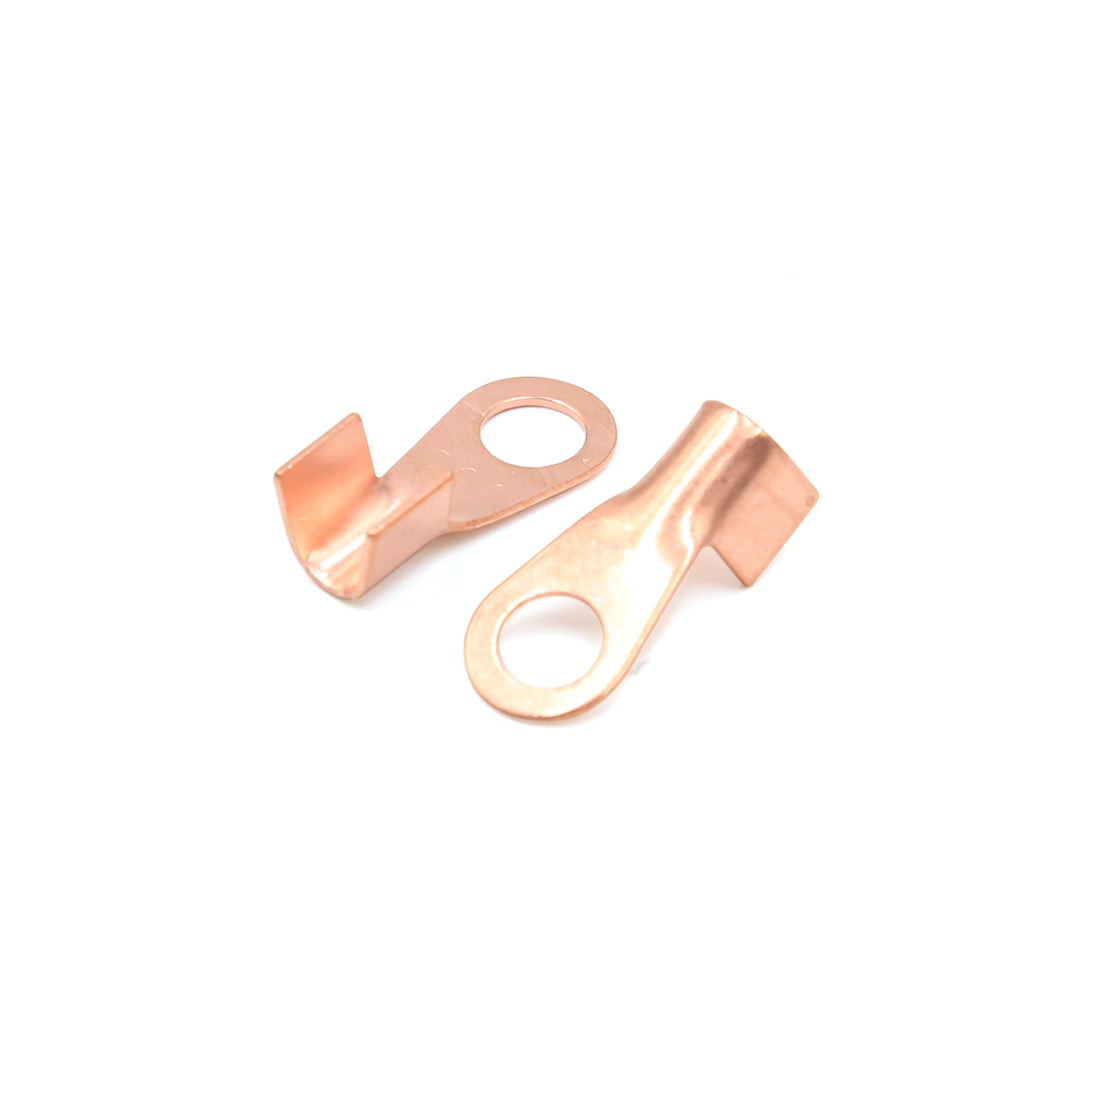 5PCS Copper Lug Battery Cable Connector Terminal Jointing Sleeve 100A DIY New 